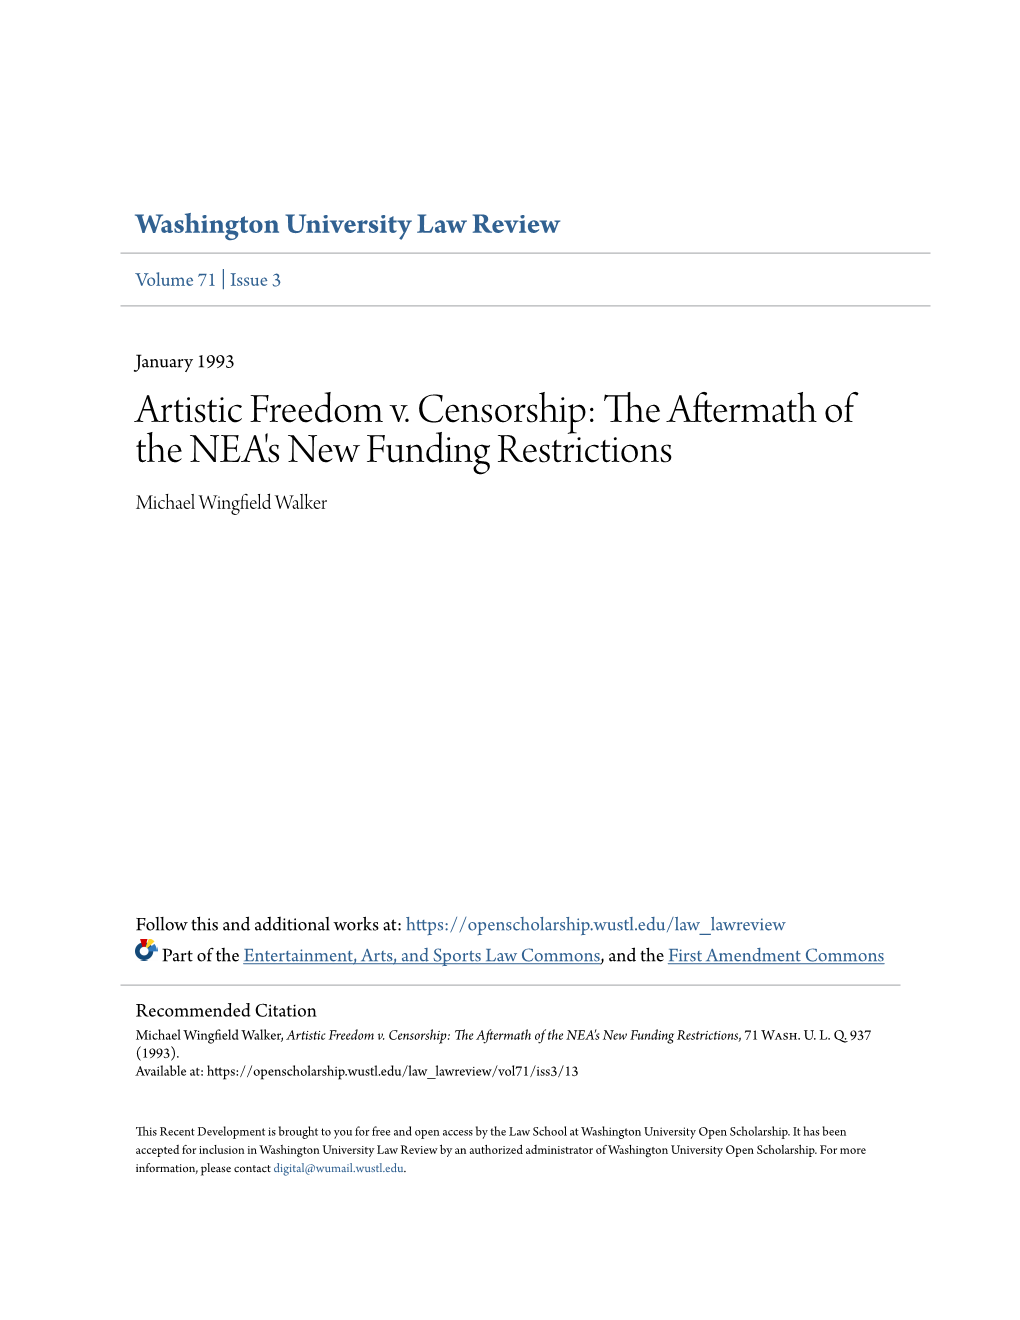 Artistic Freedom V. Censorship: the Aftermath of the NEA's New Funding Restrictions Michael Wingfield Alw Ker